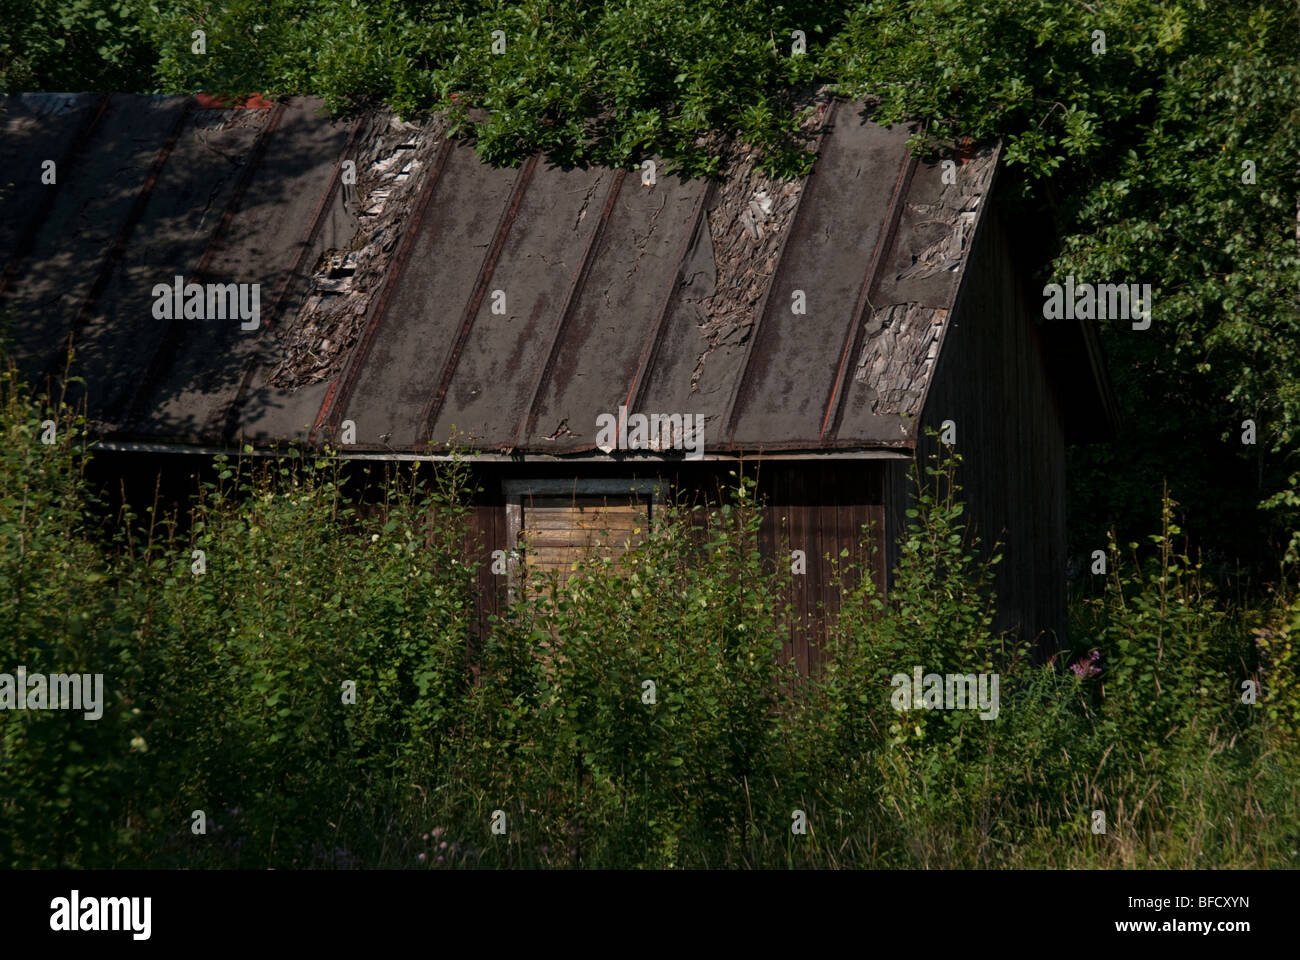 A ramshackle shack overgrown with foliage Stock Photo